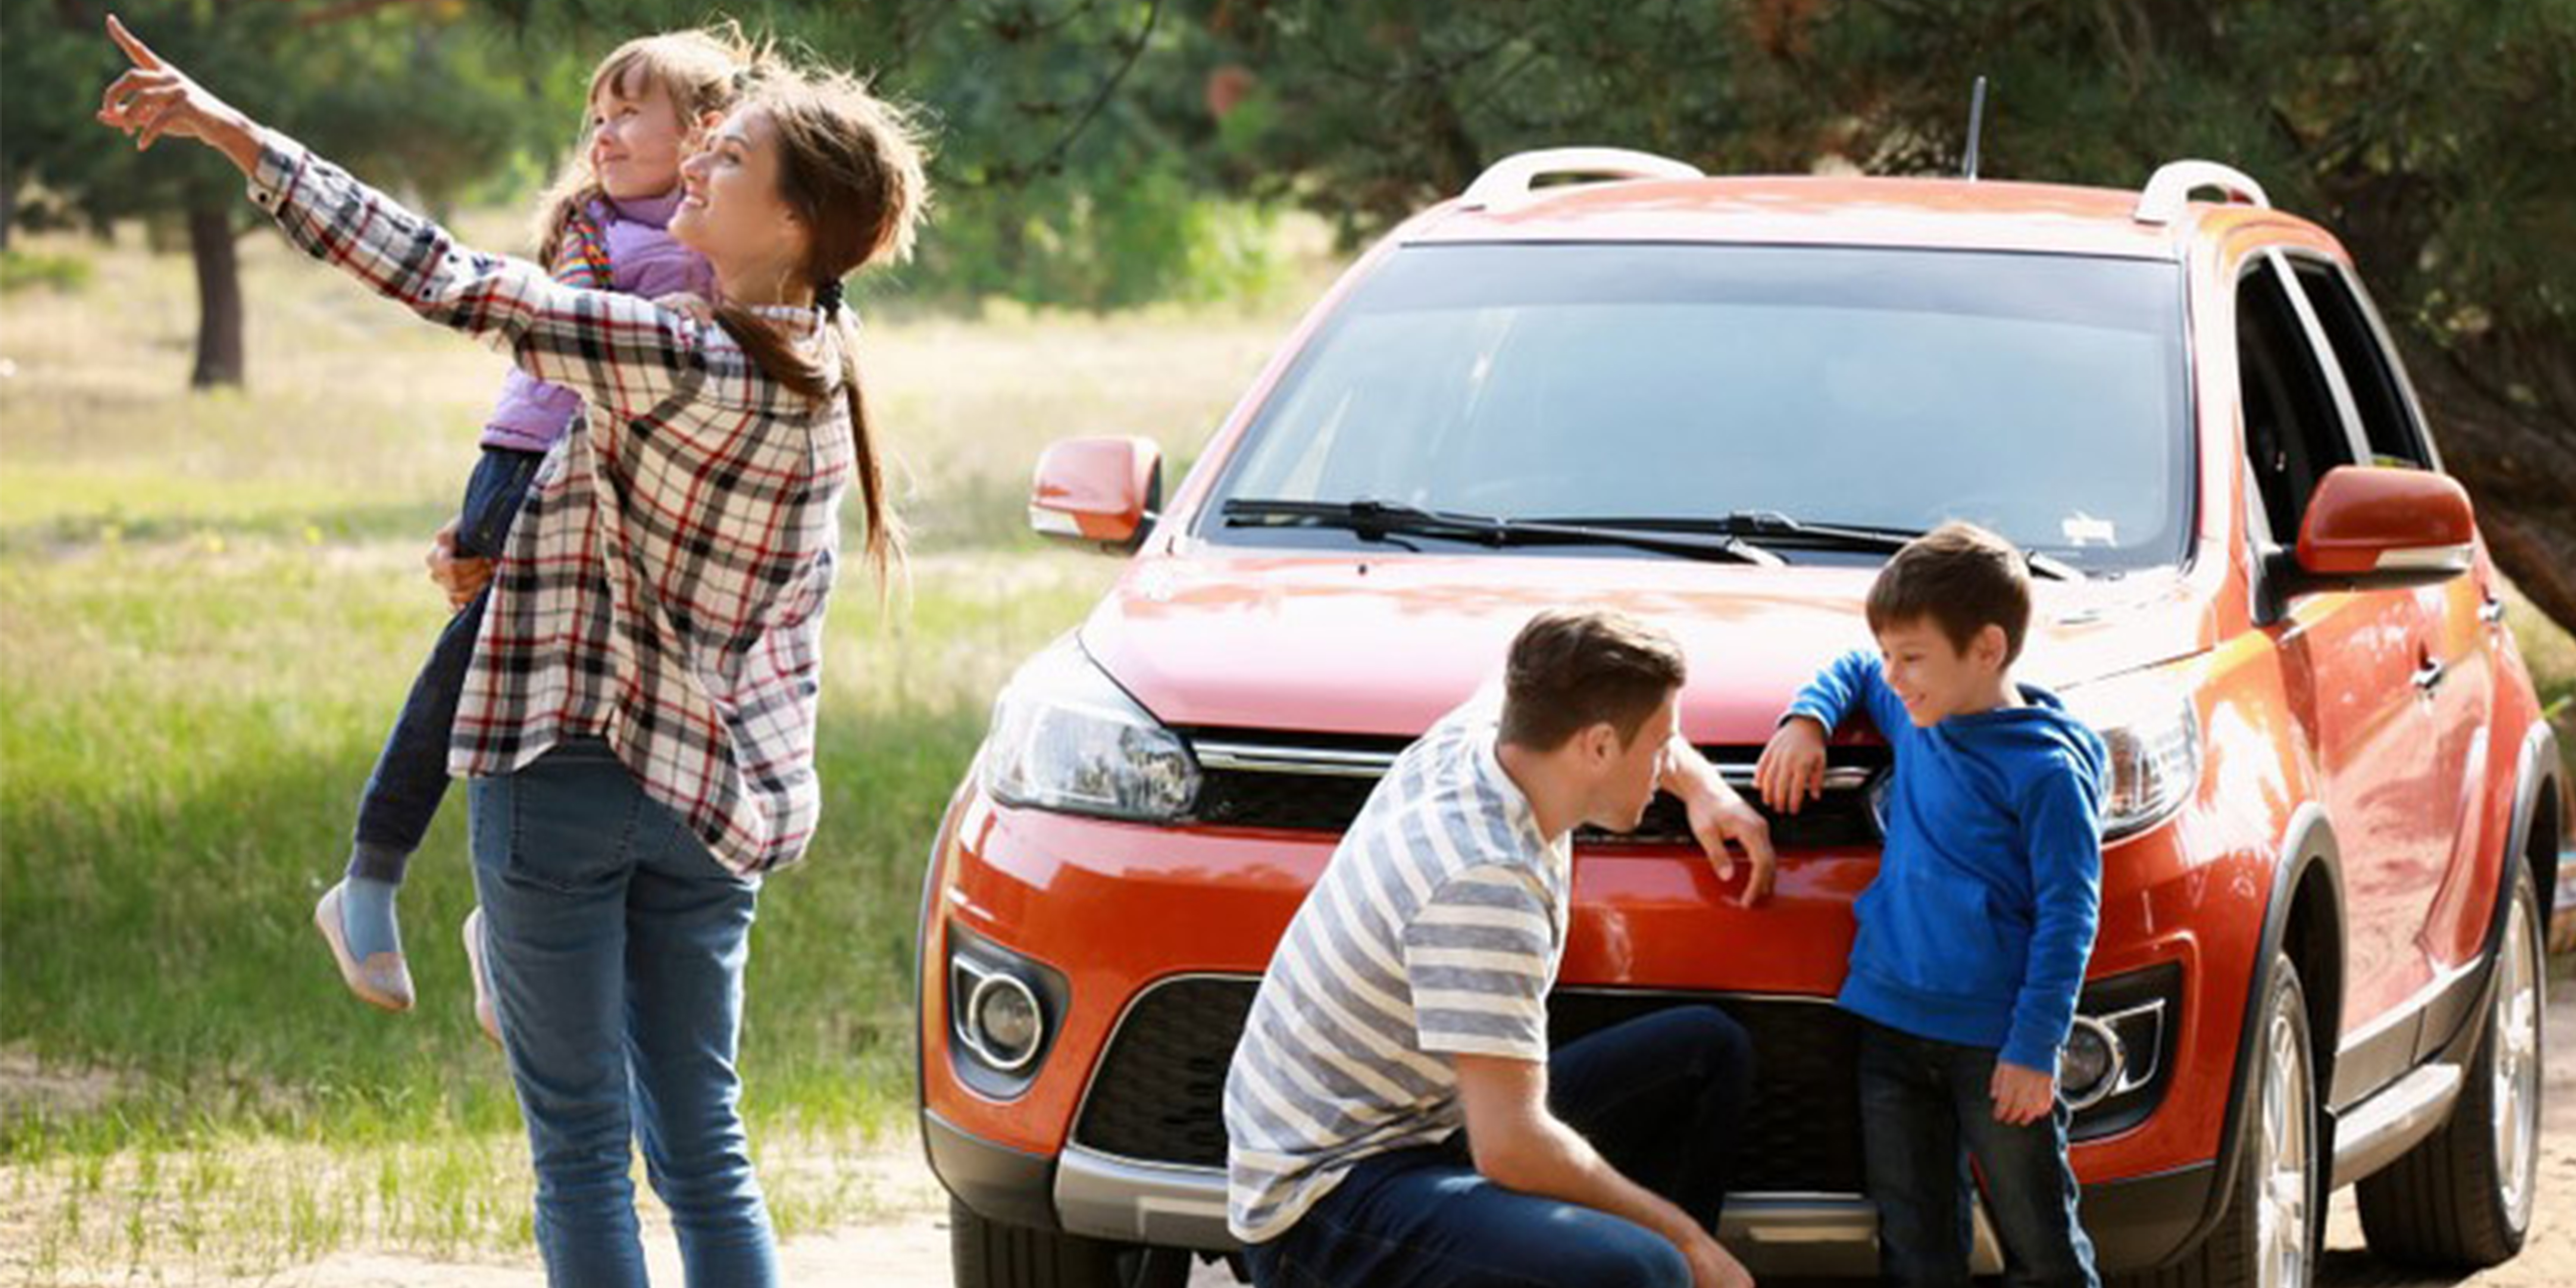 7 of the Best Car Features for a Family